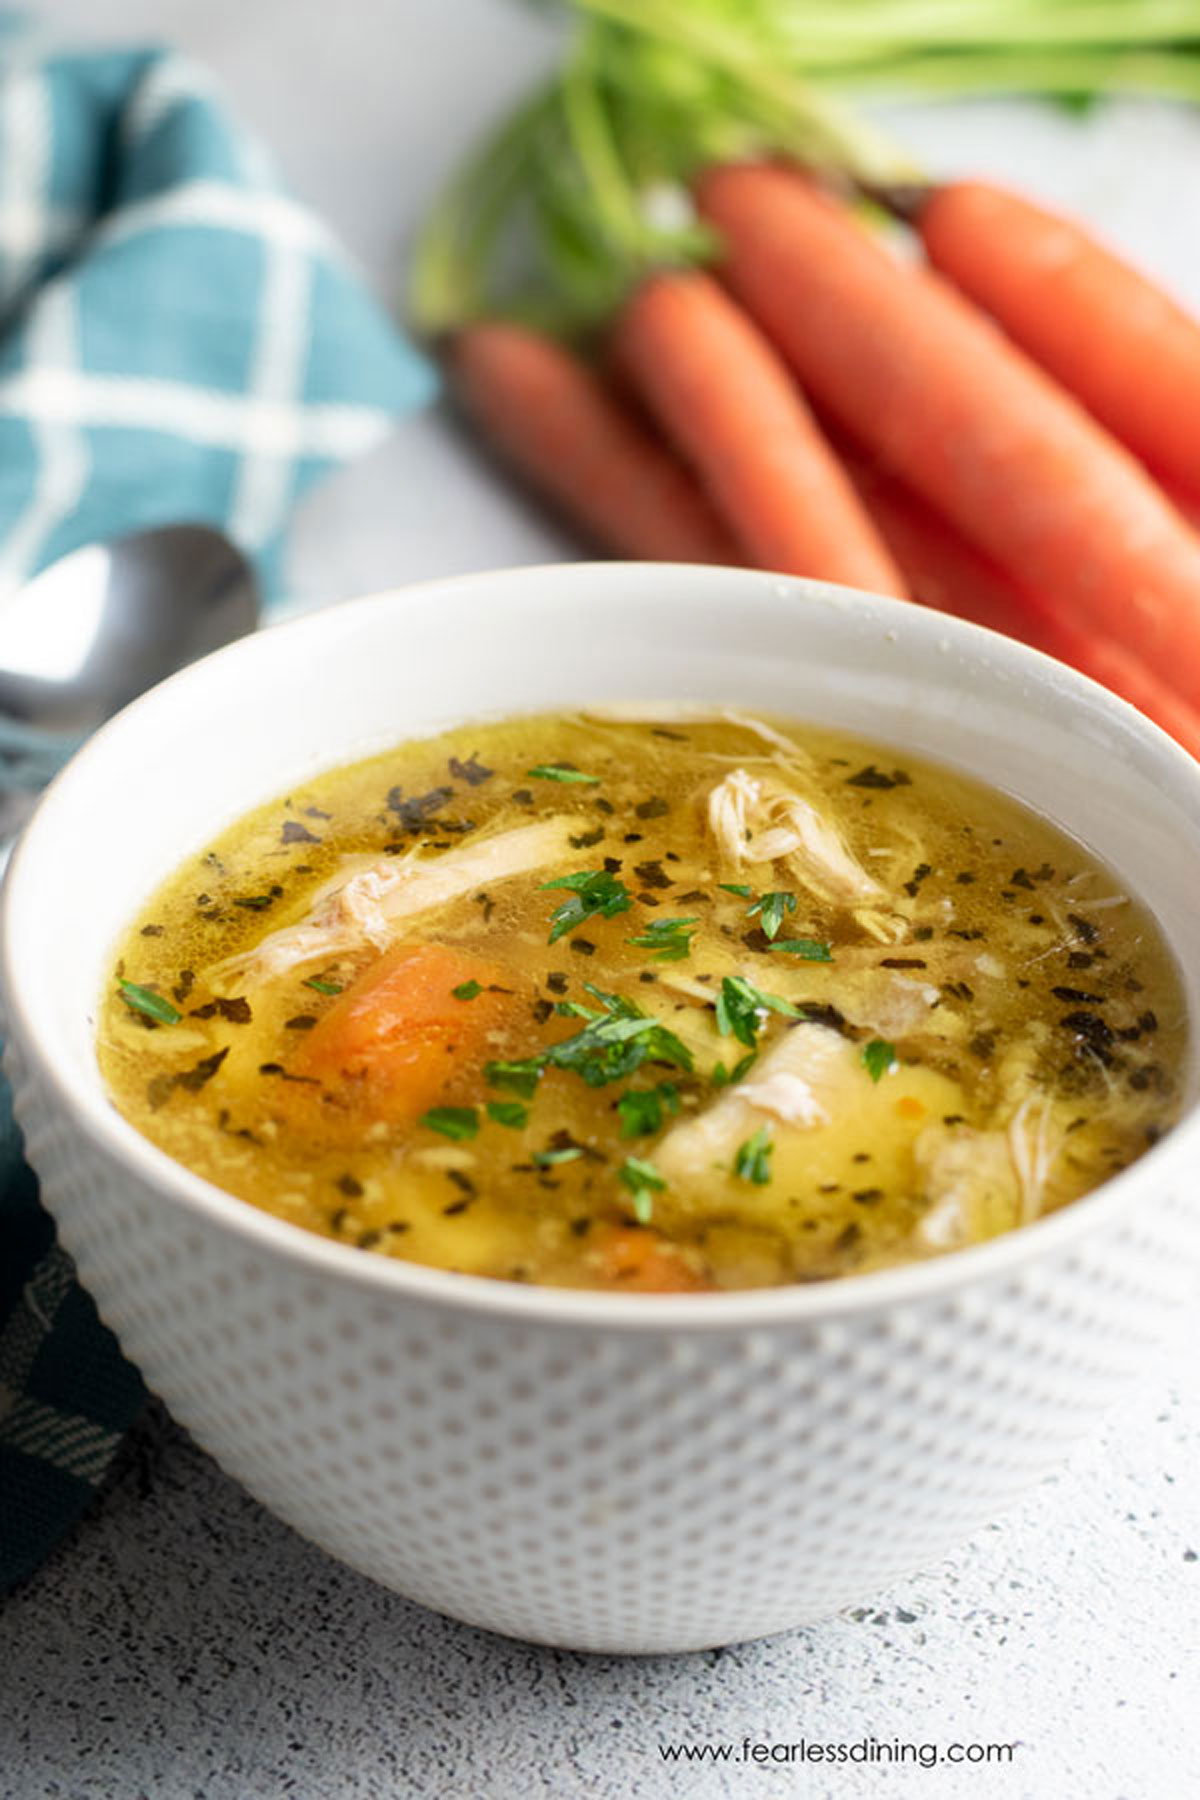 Homemade Nourishing Chicken Soup from Scratch! (Using a Whole